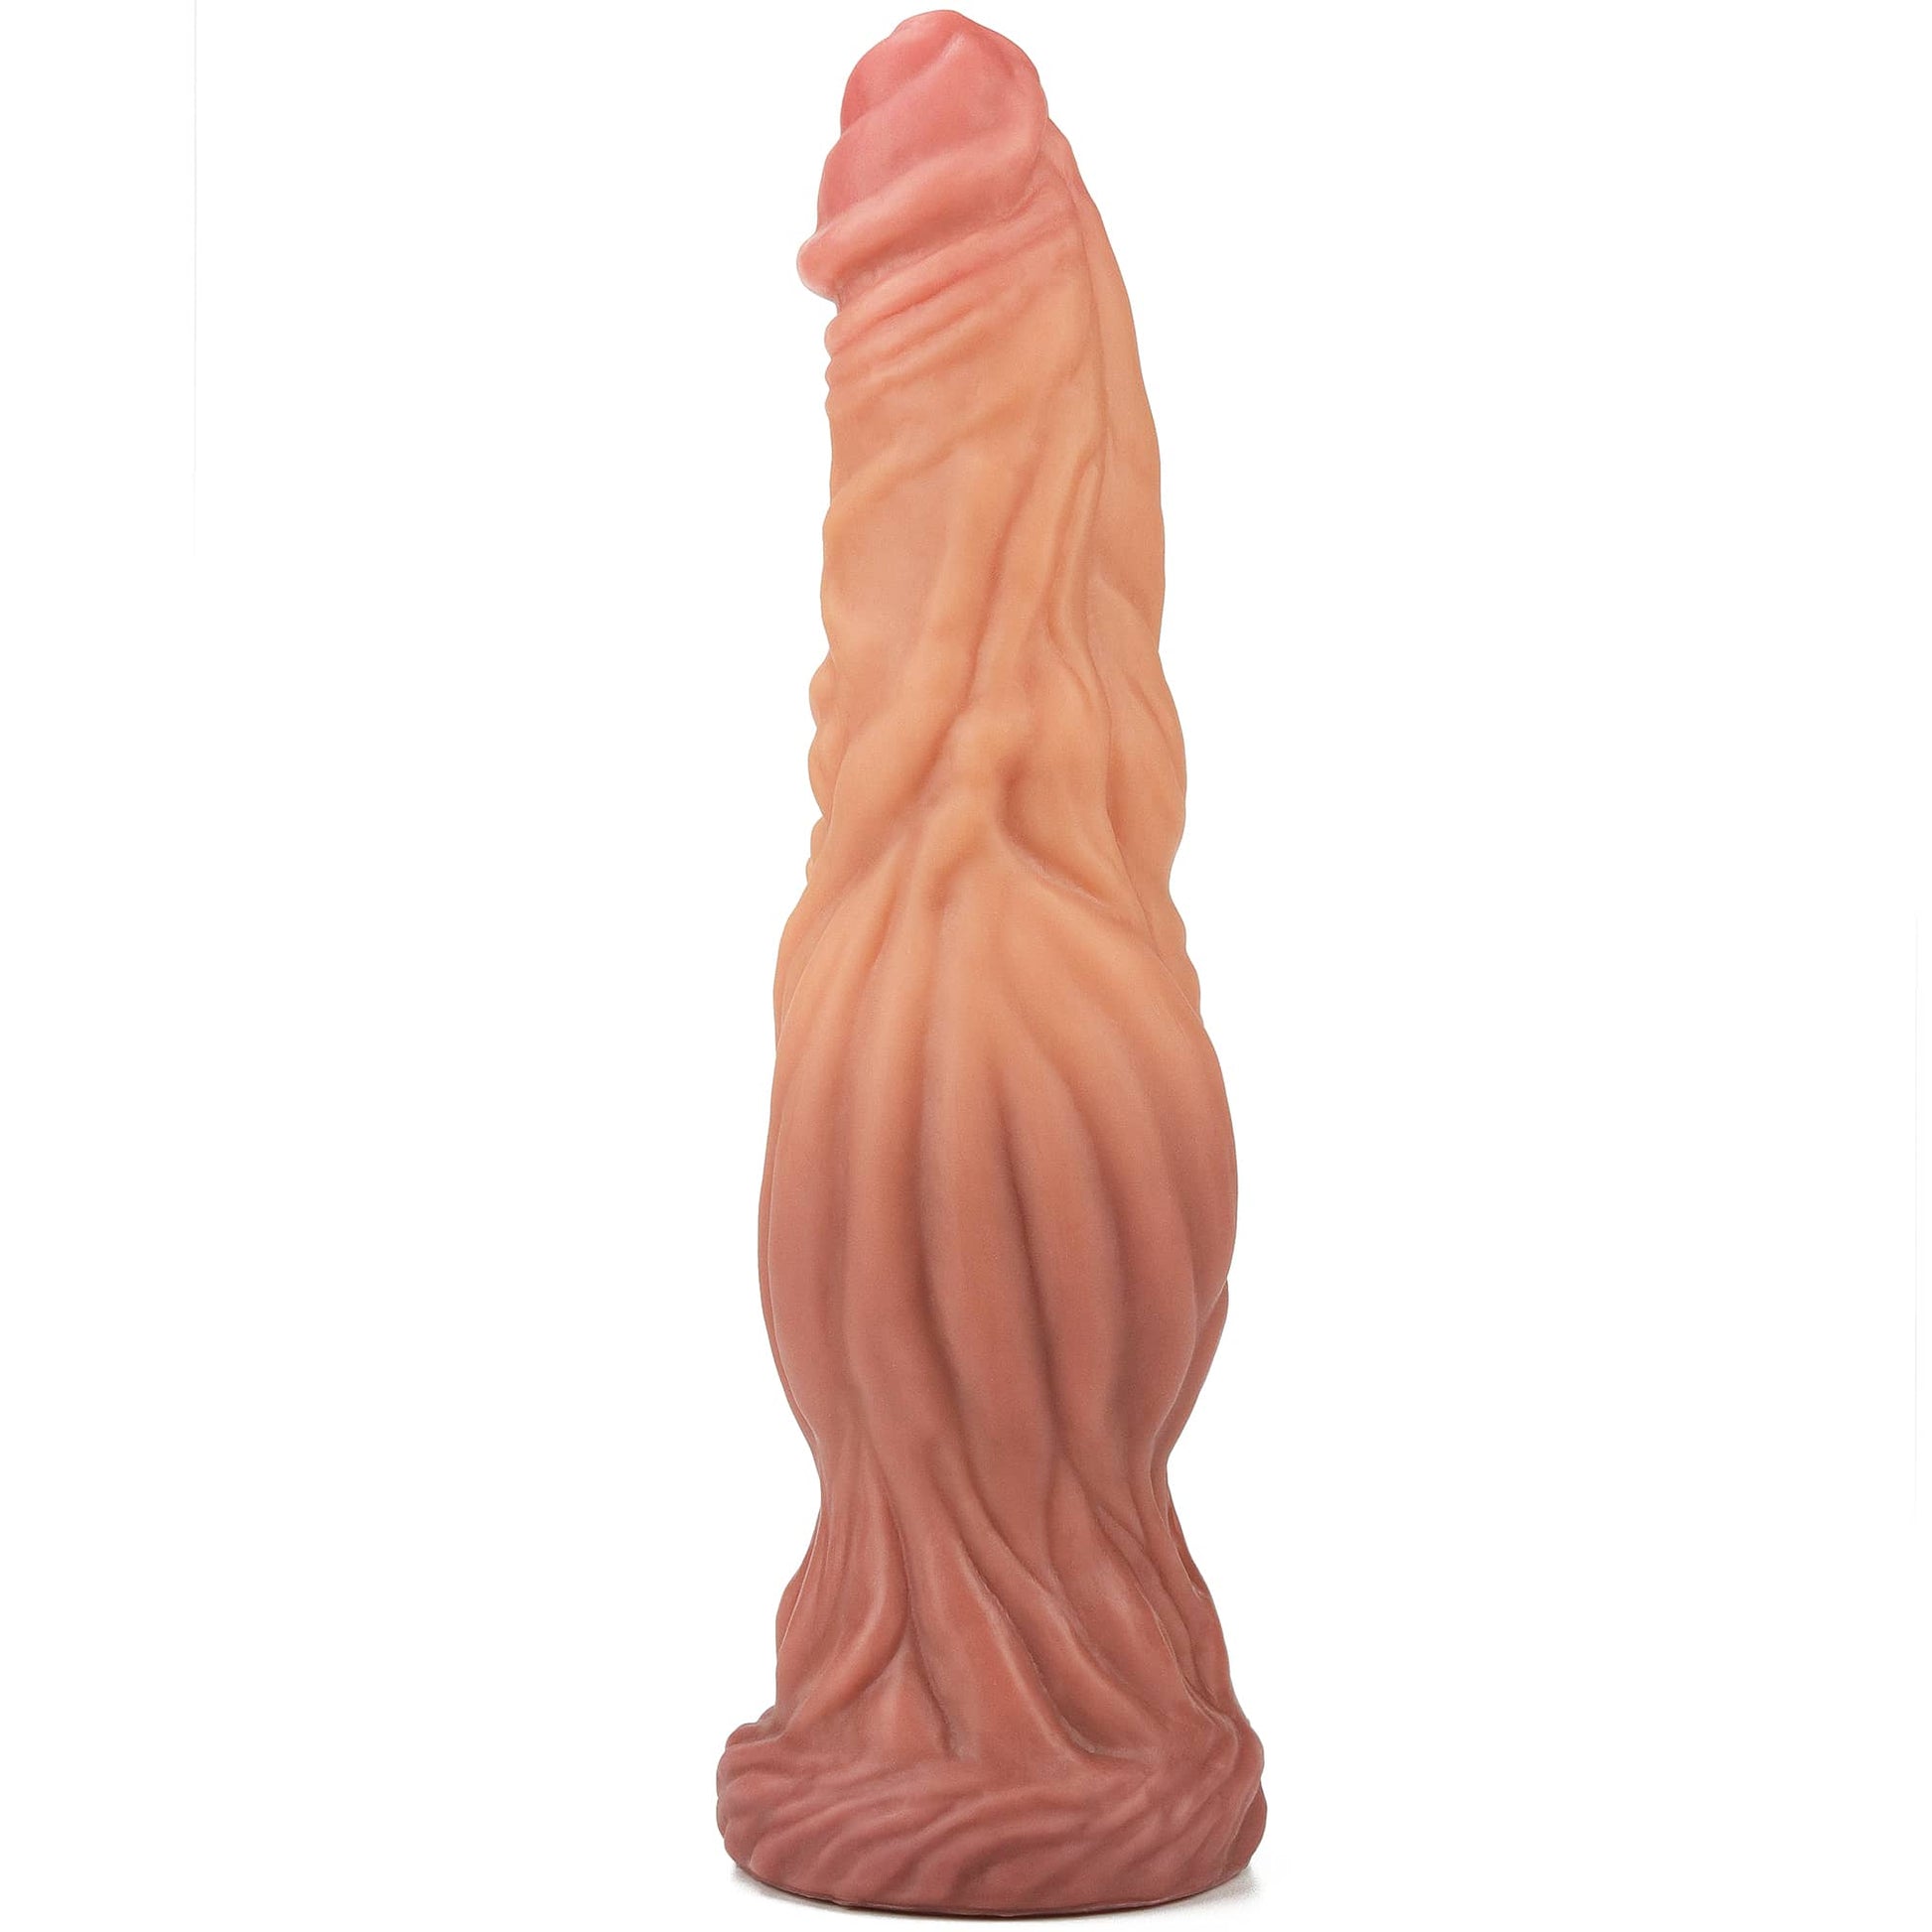 The 9.5 inches silicone realistic wolf dildo is upright